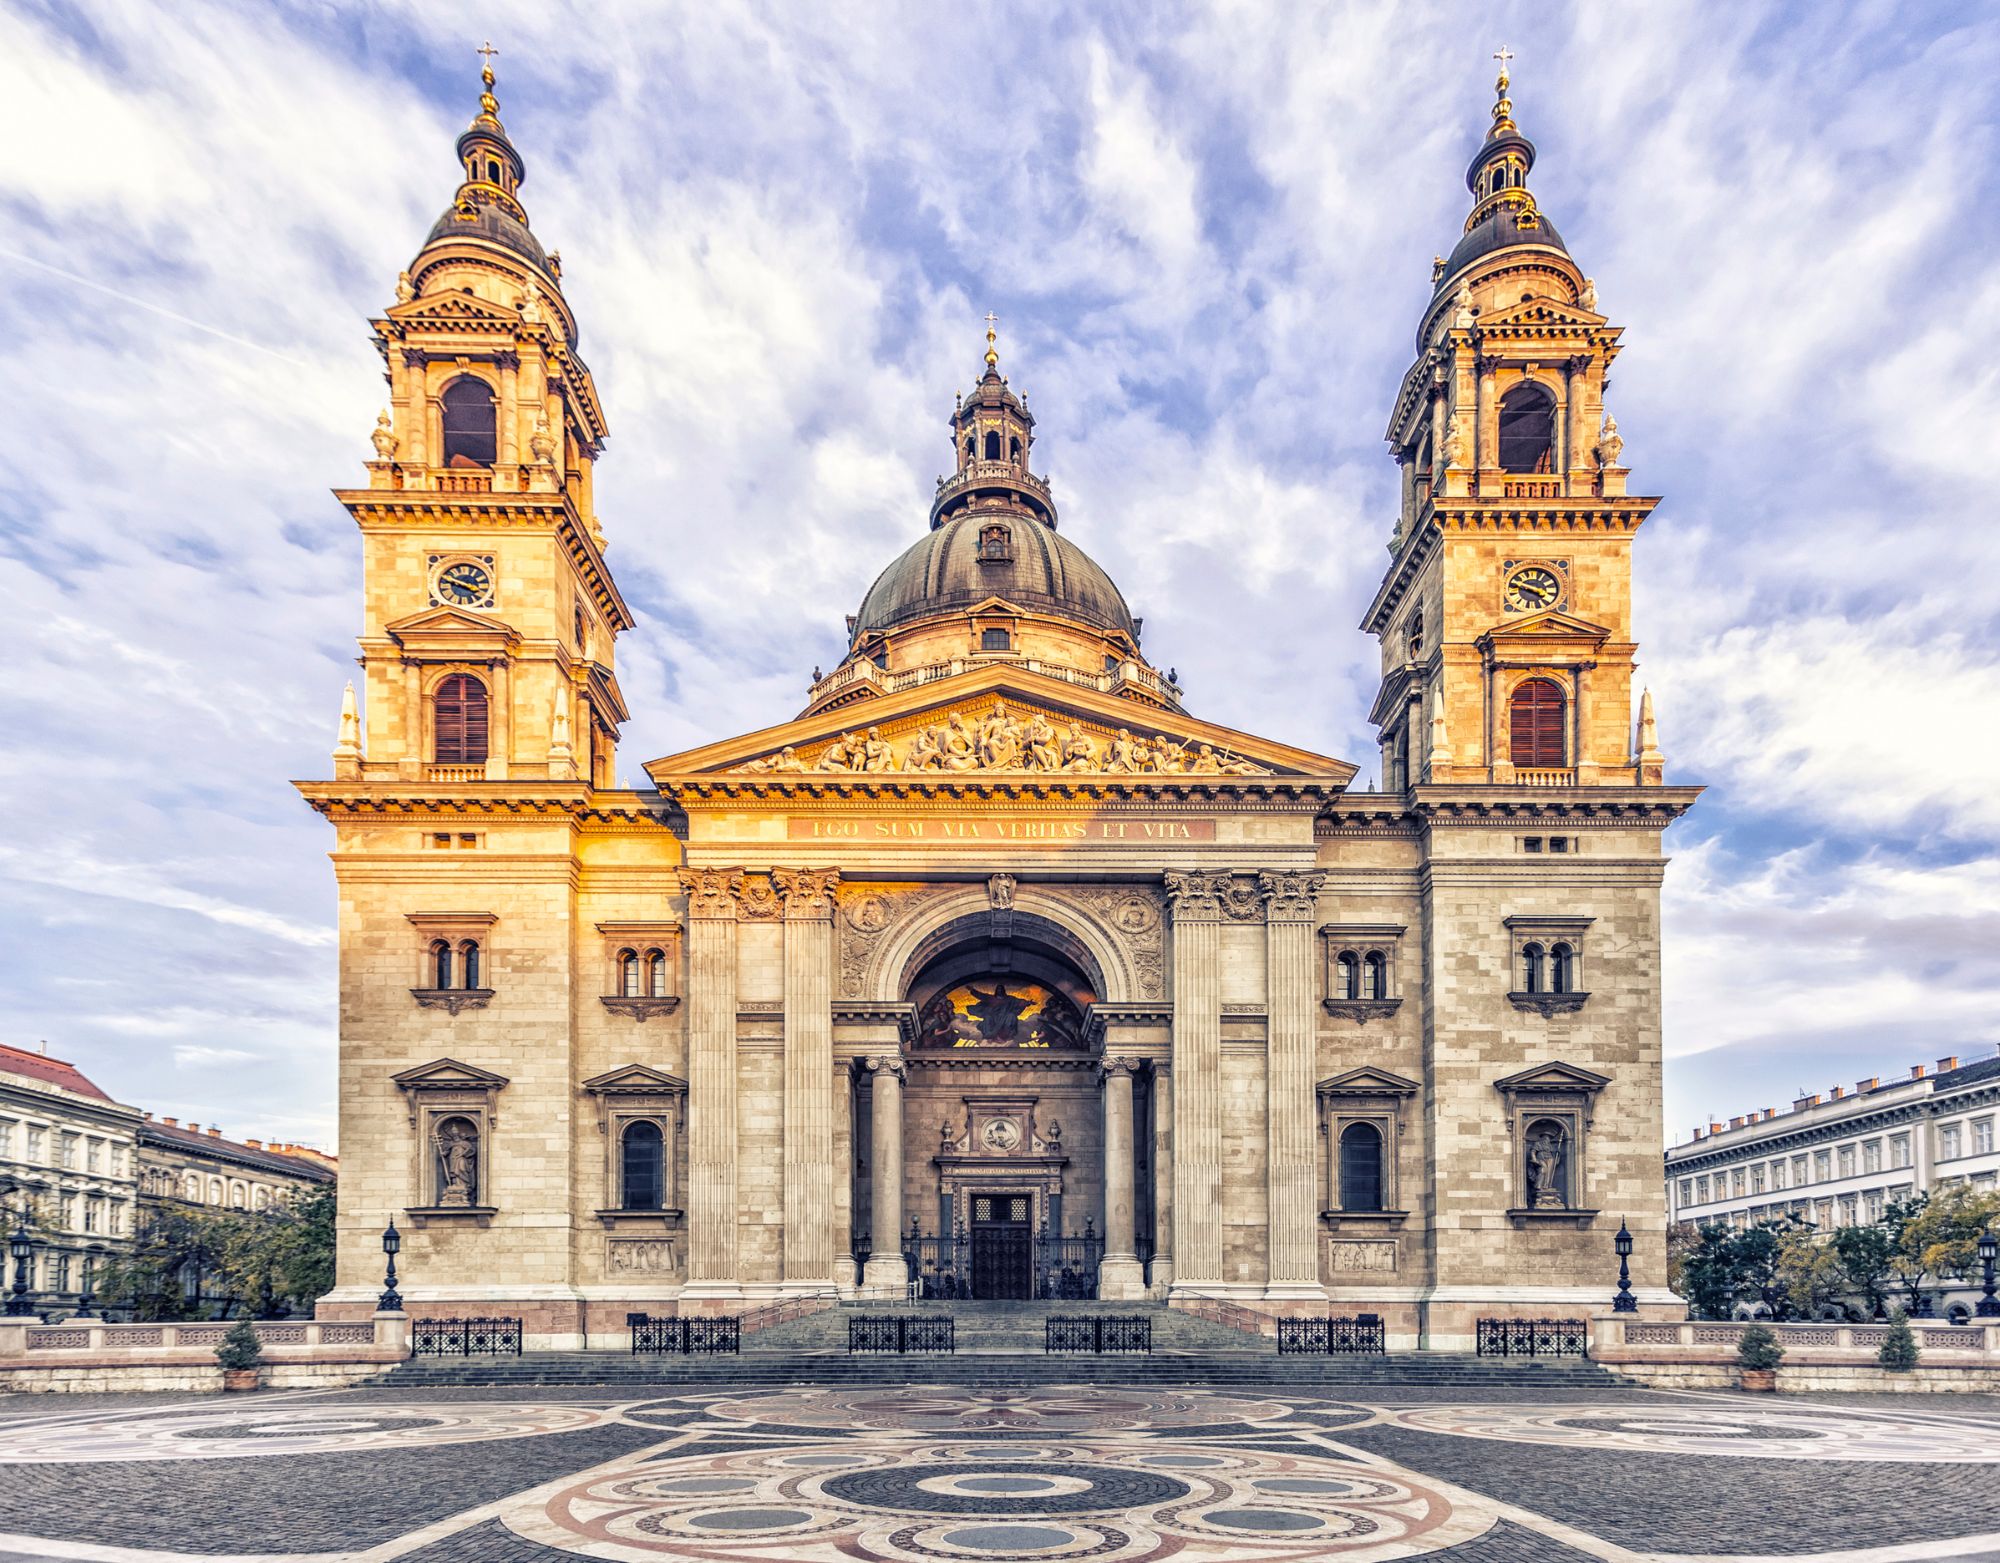 St. Stephen’s Basilica, an outstanding piece of architecture in the heart of Budapest